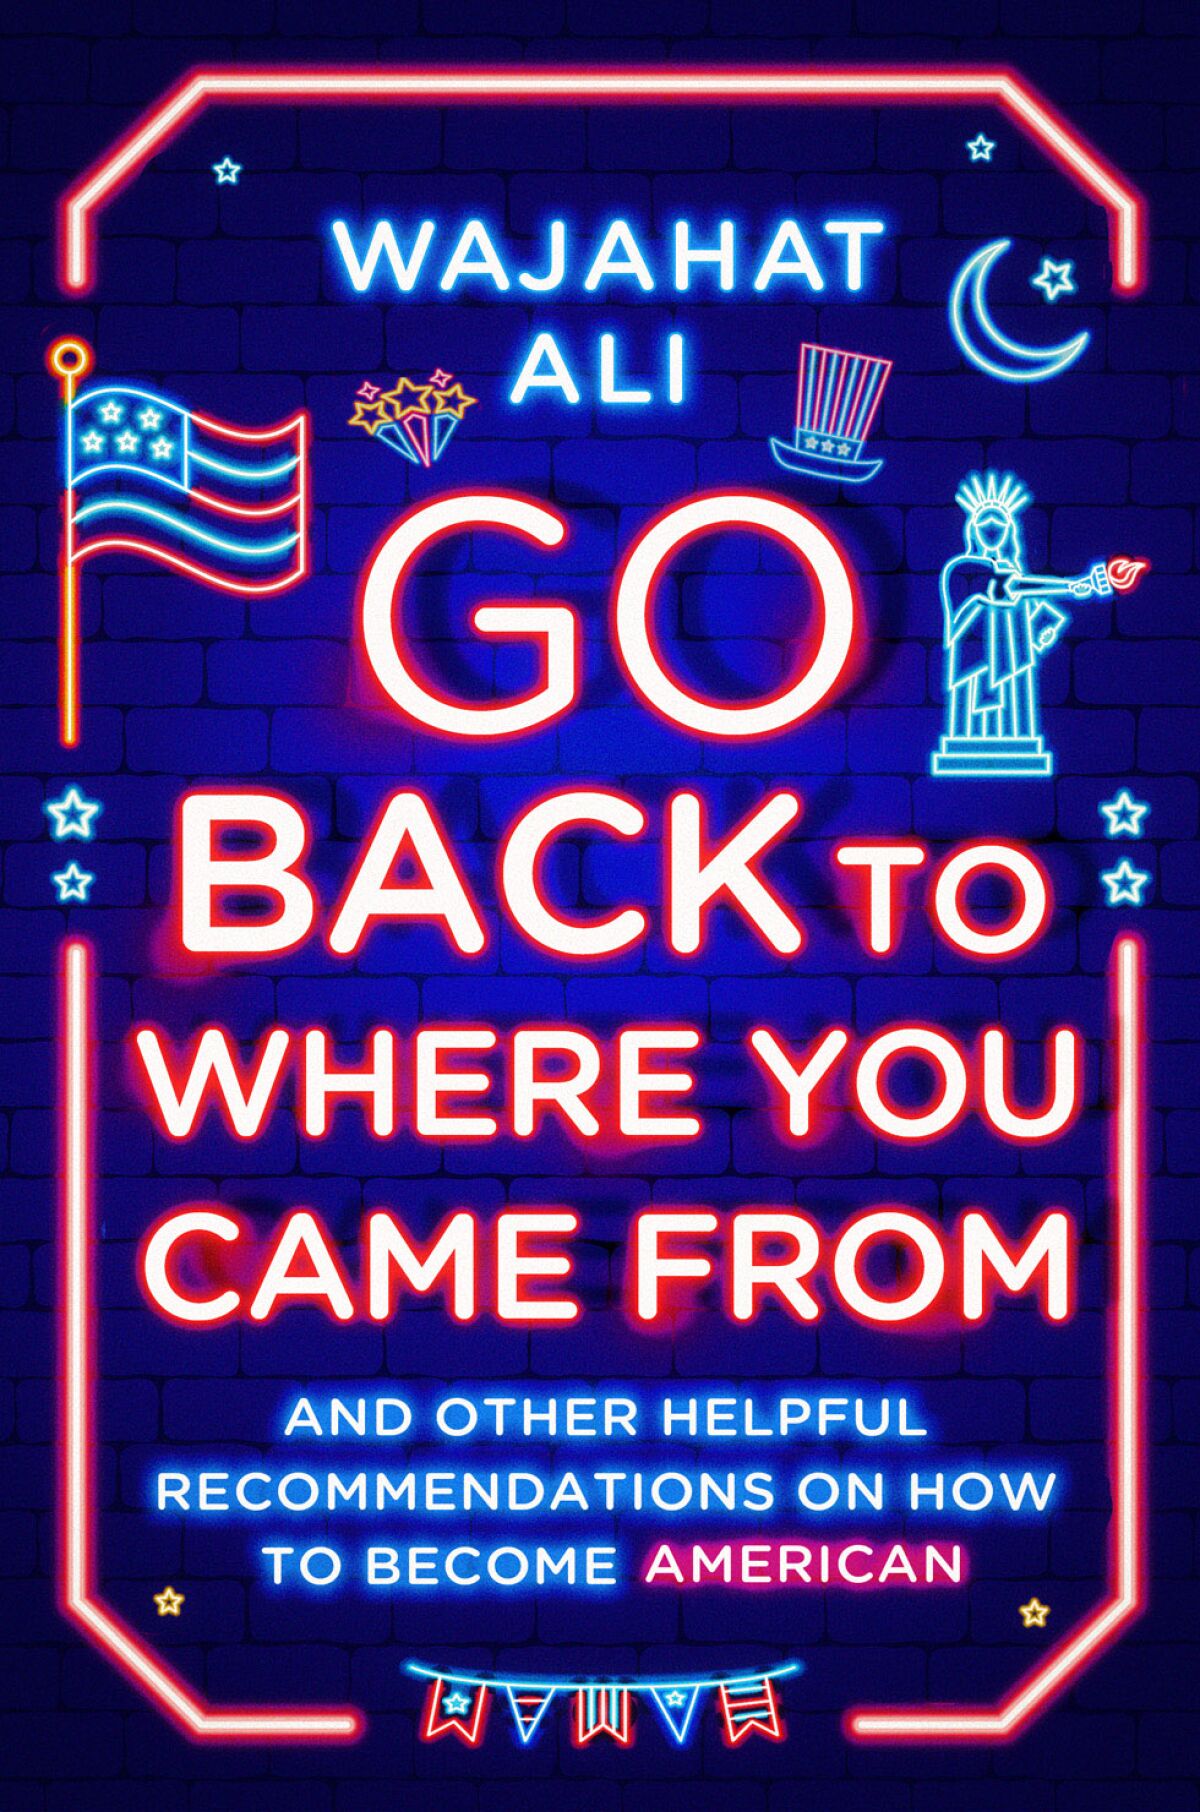 The cover of "Go Back to Where You Came From," by Wajahat Ali